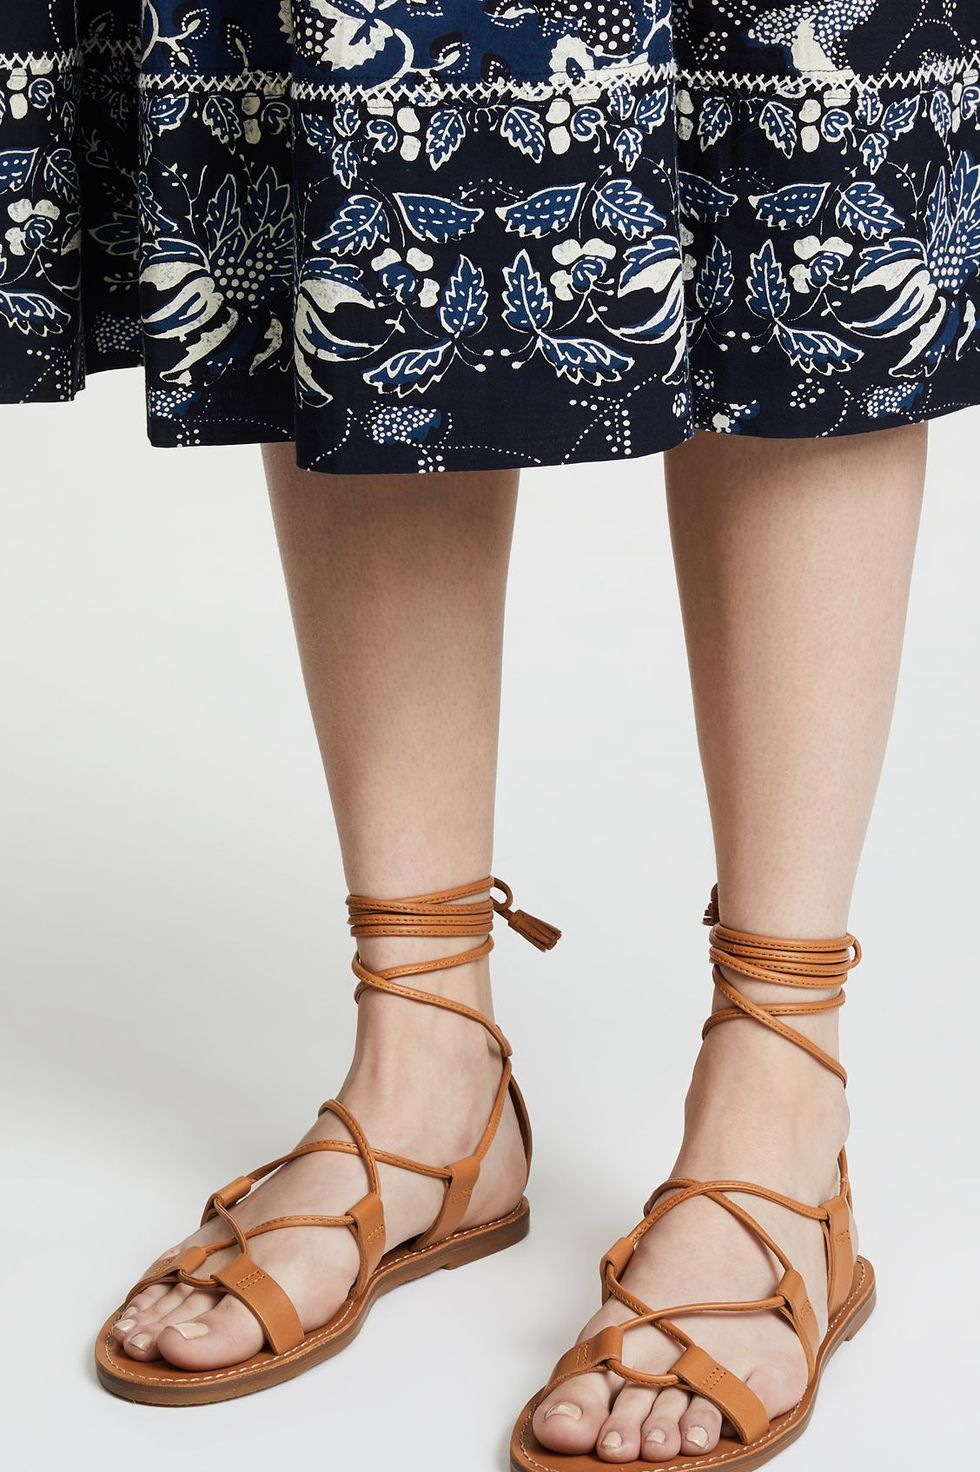 18 Cute Shoes You Need This Summer – Summer 2018 Shoe Trends and